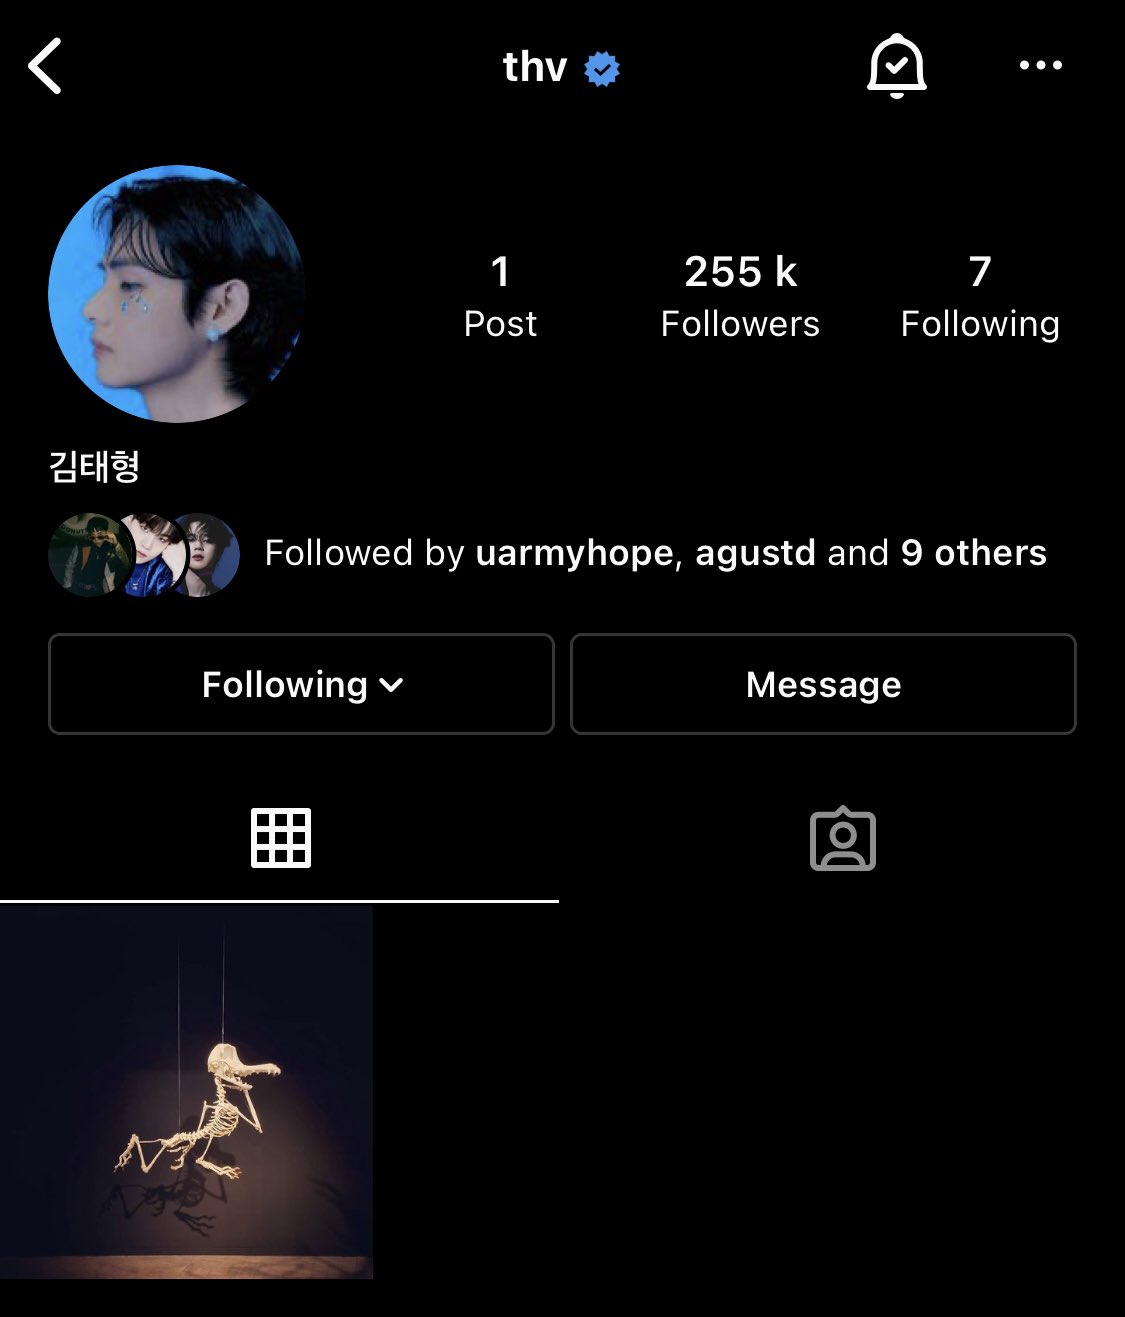 Taehyung Pics Taehyung Has An Official Instagram Account Now Omg V T Co Mcgthjmdfq T Co Ofheisaesh Twitter